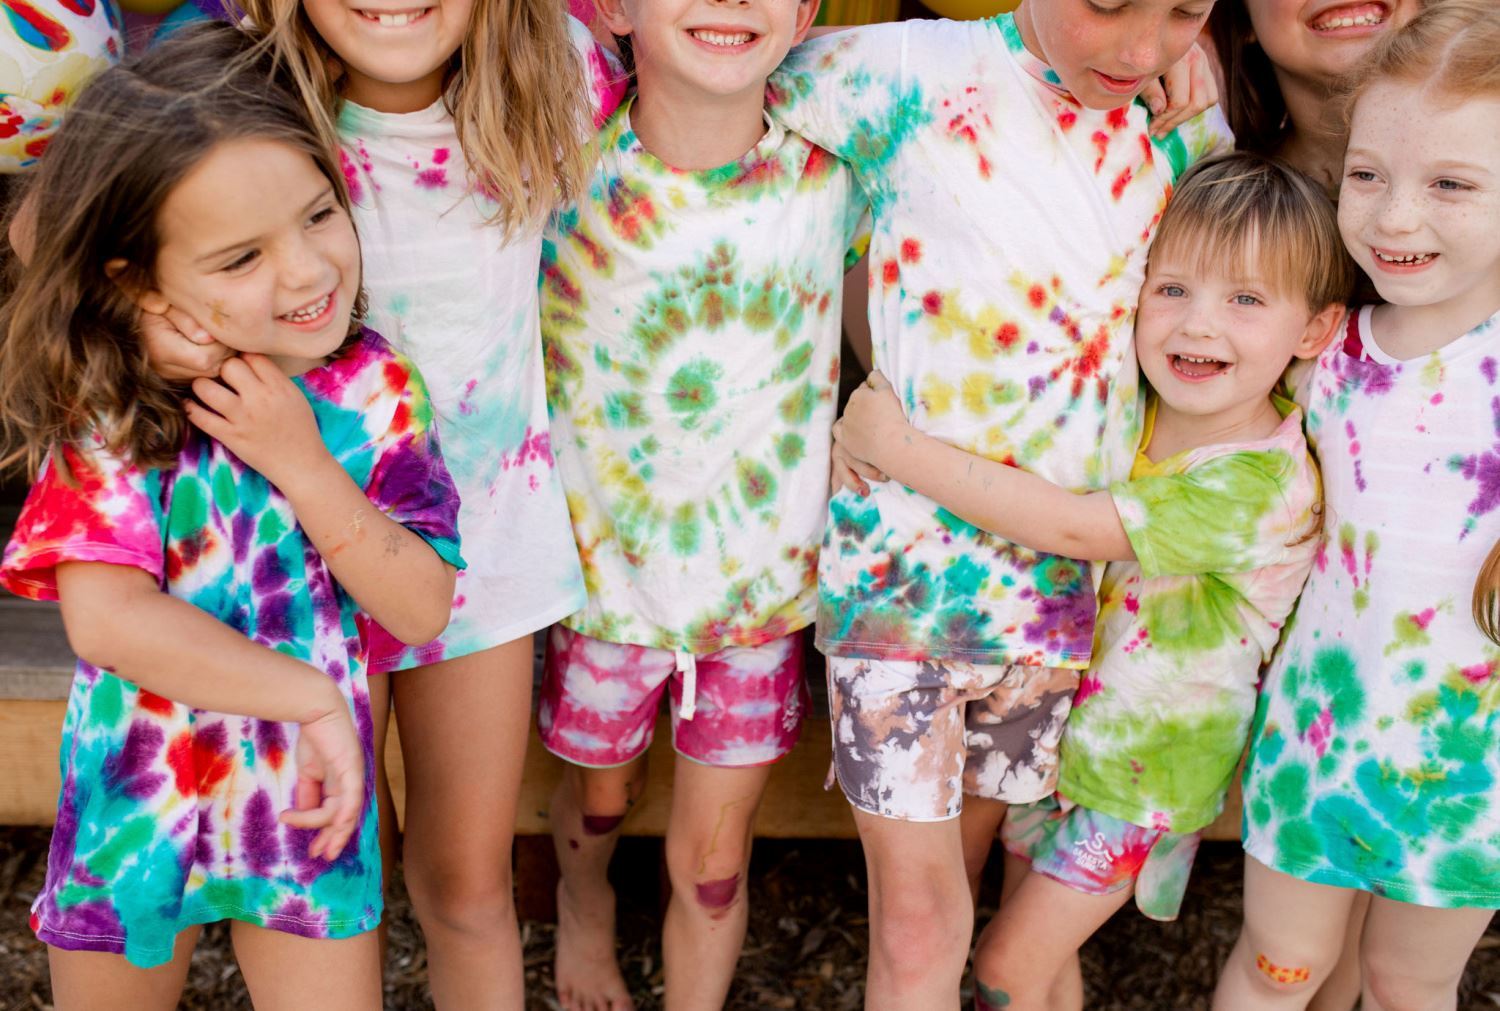 How to throw a tie-dye party in your backyard